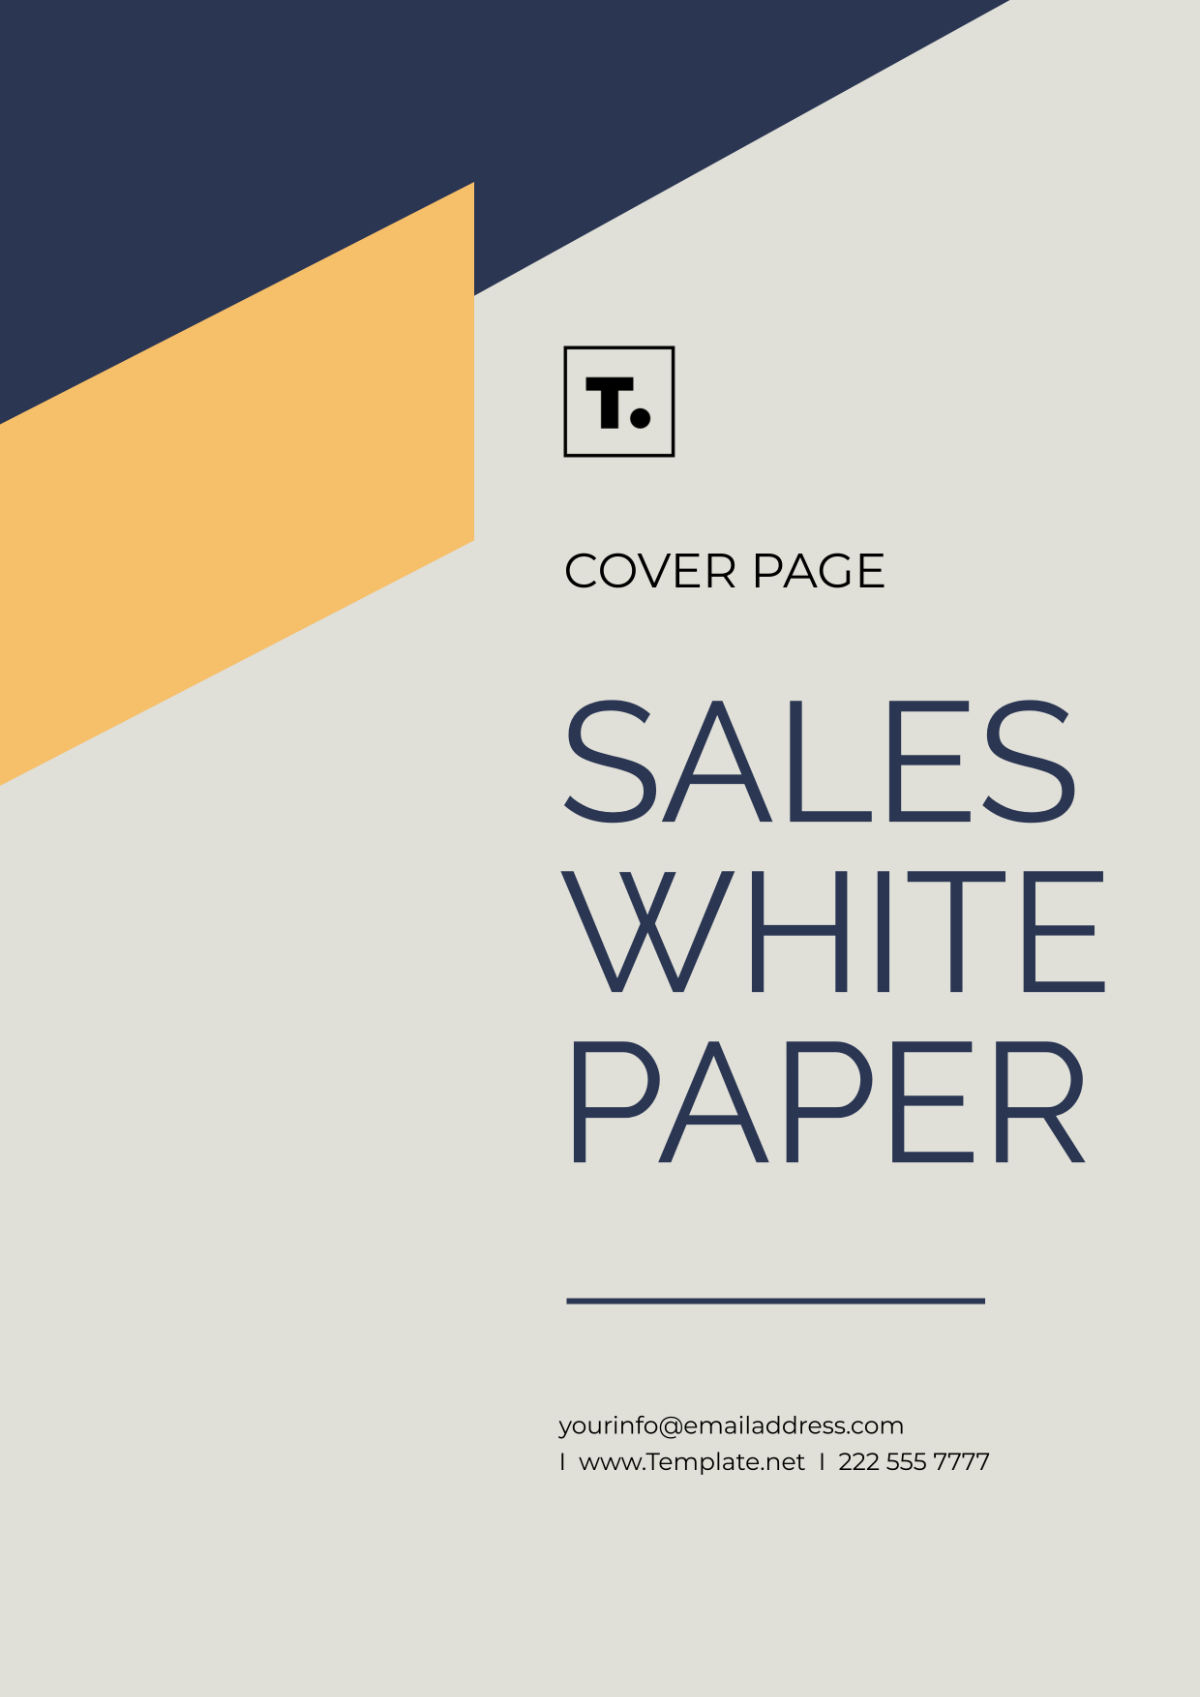 Sales White Paper Cover Page